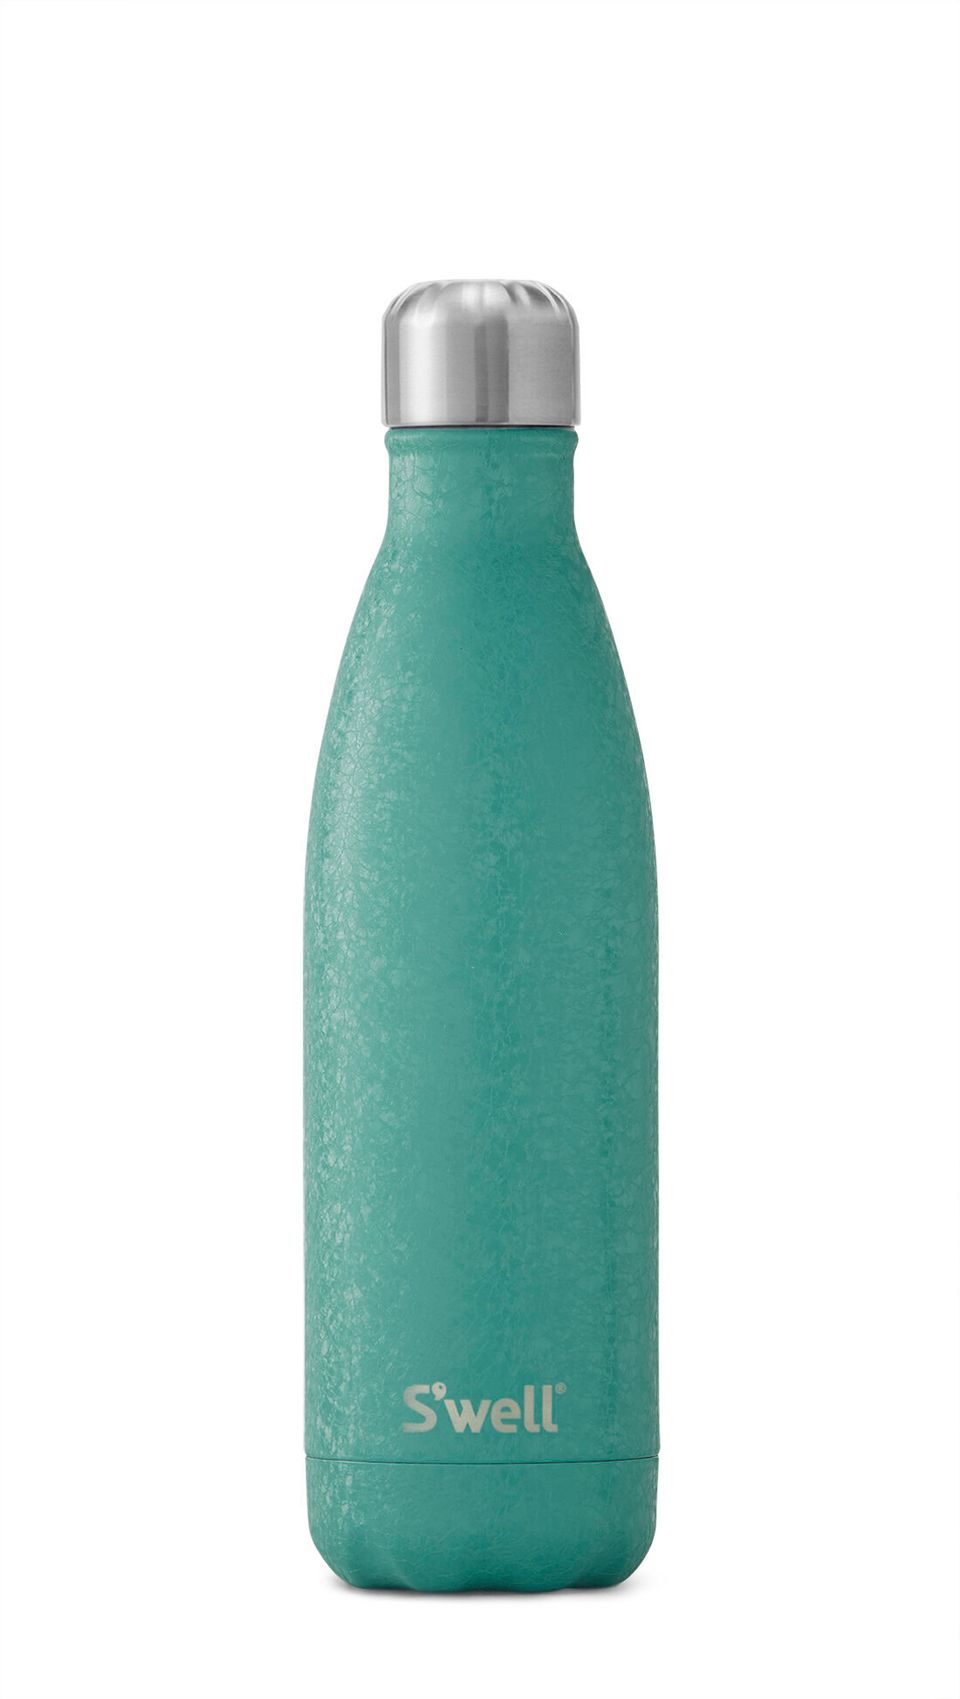 Why Some Reusable Water Bottles Are More Expensive Than Others